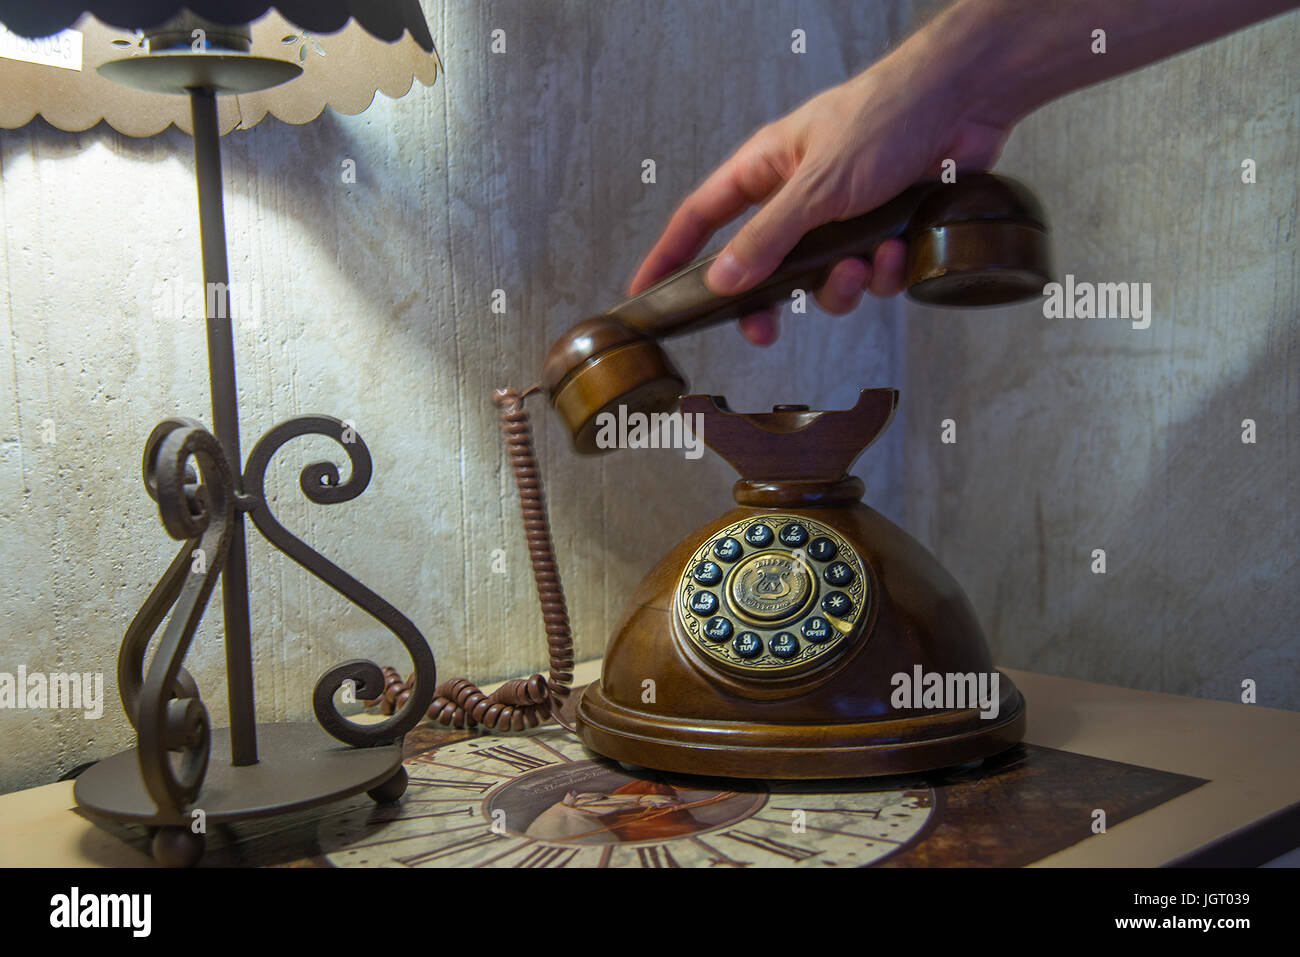 Man's hand picking up the handset of an old fashioned telephone. Stock Photo